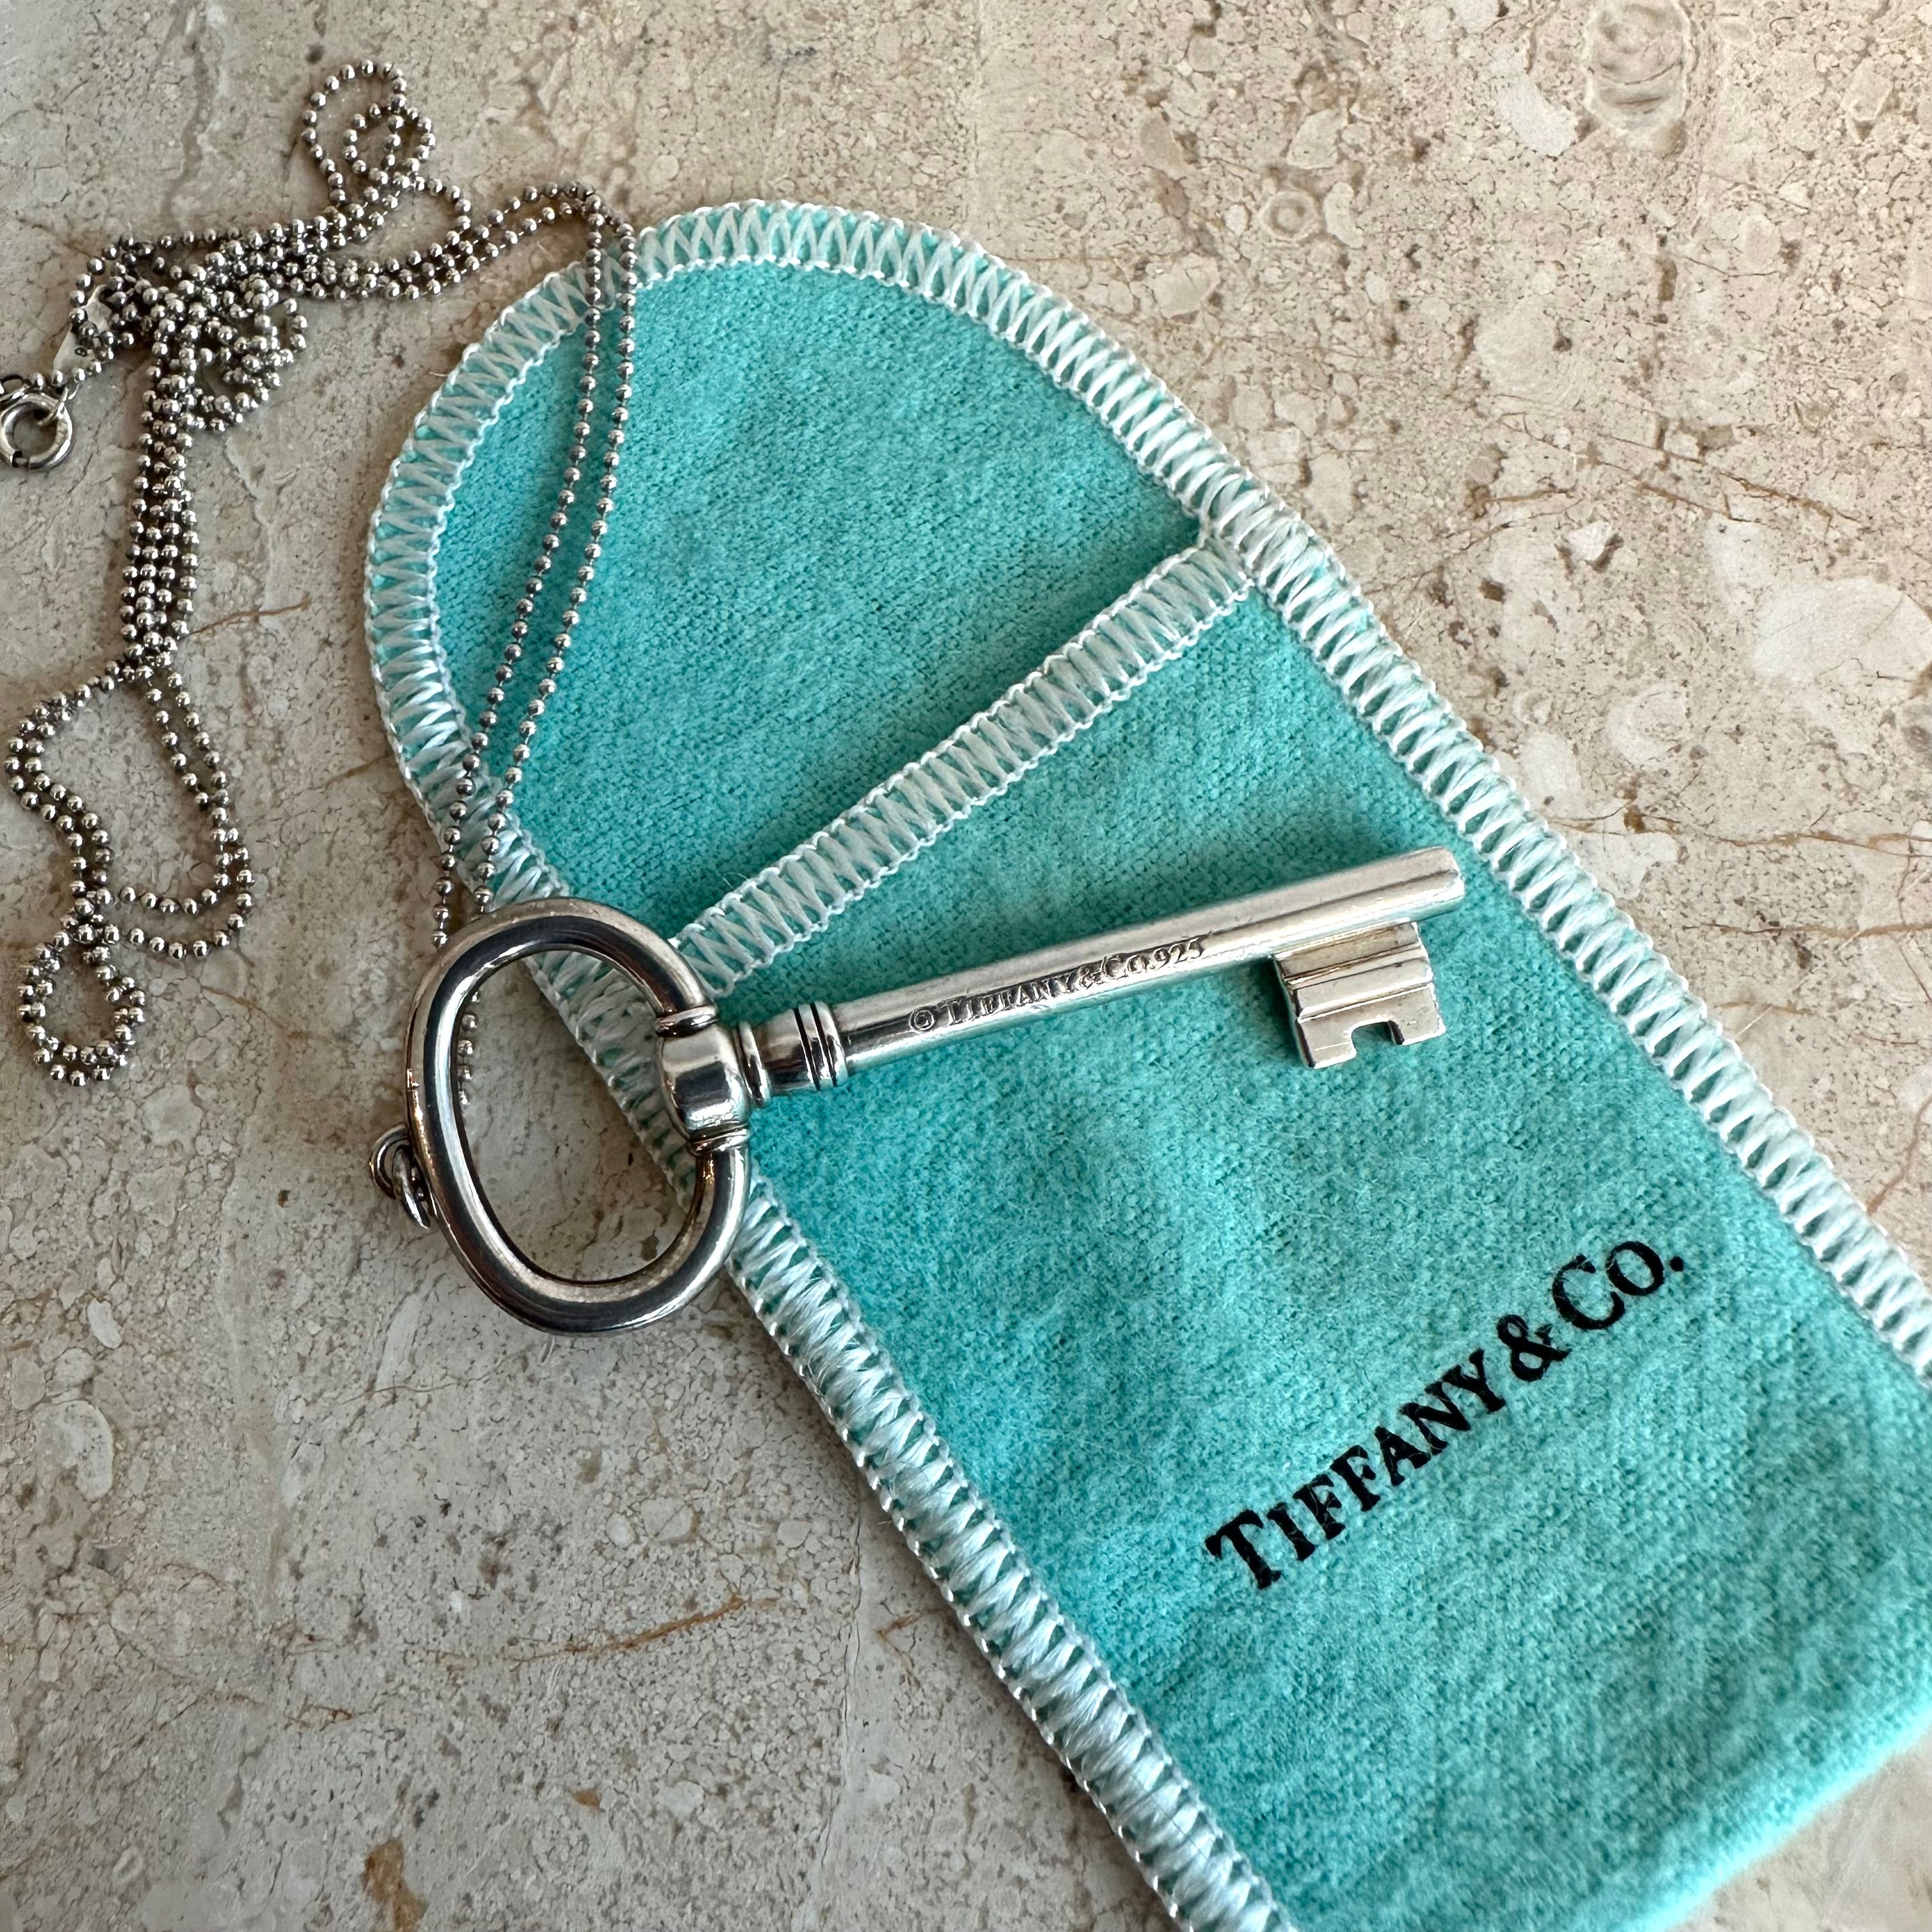 Pre-Owned TIFFANY & CO. Sterling Silver Oval Key Pendant and Chain